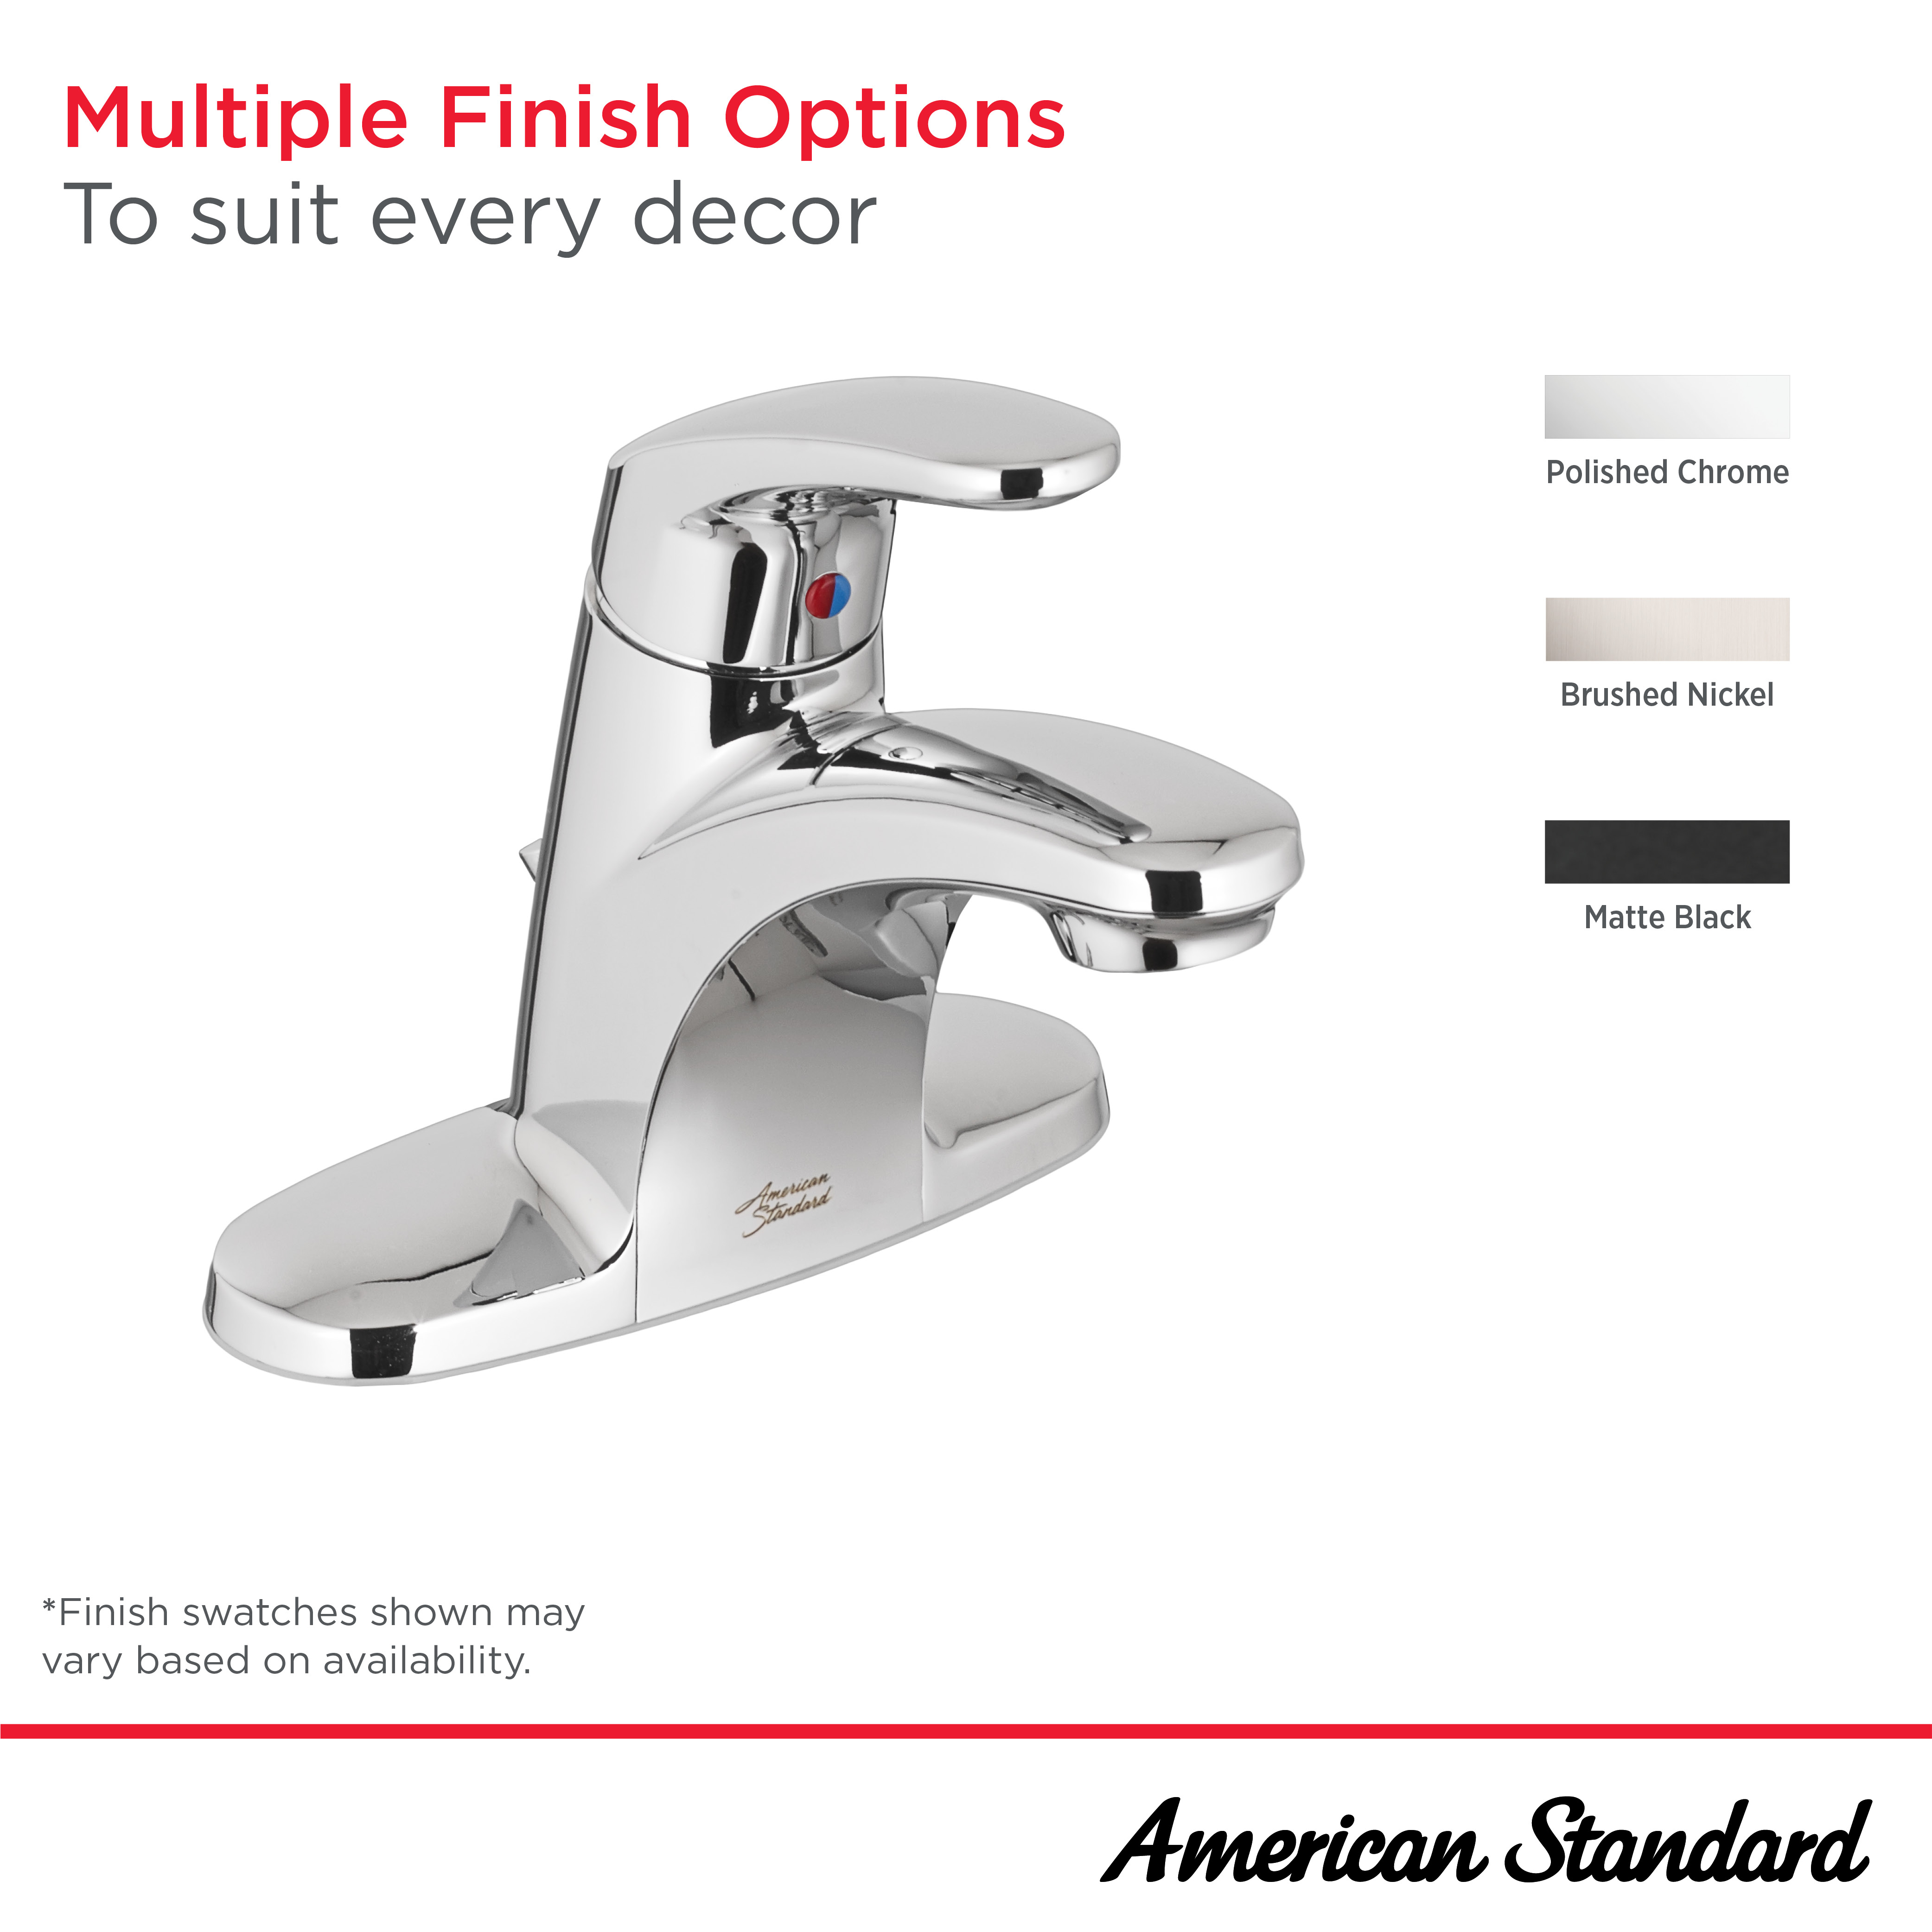 Colony® PRO 4-Inch Centerset Single-Handle Bathroom Faucet 1.2 gpm/4.5 Lpm Less Drain With Lever Handle